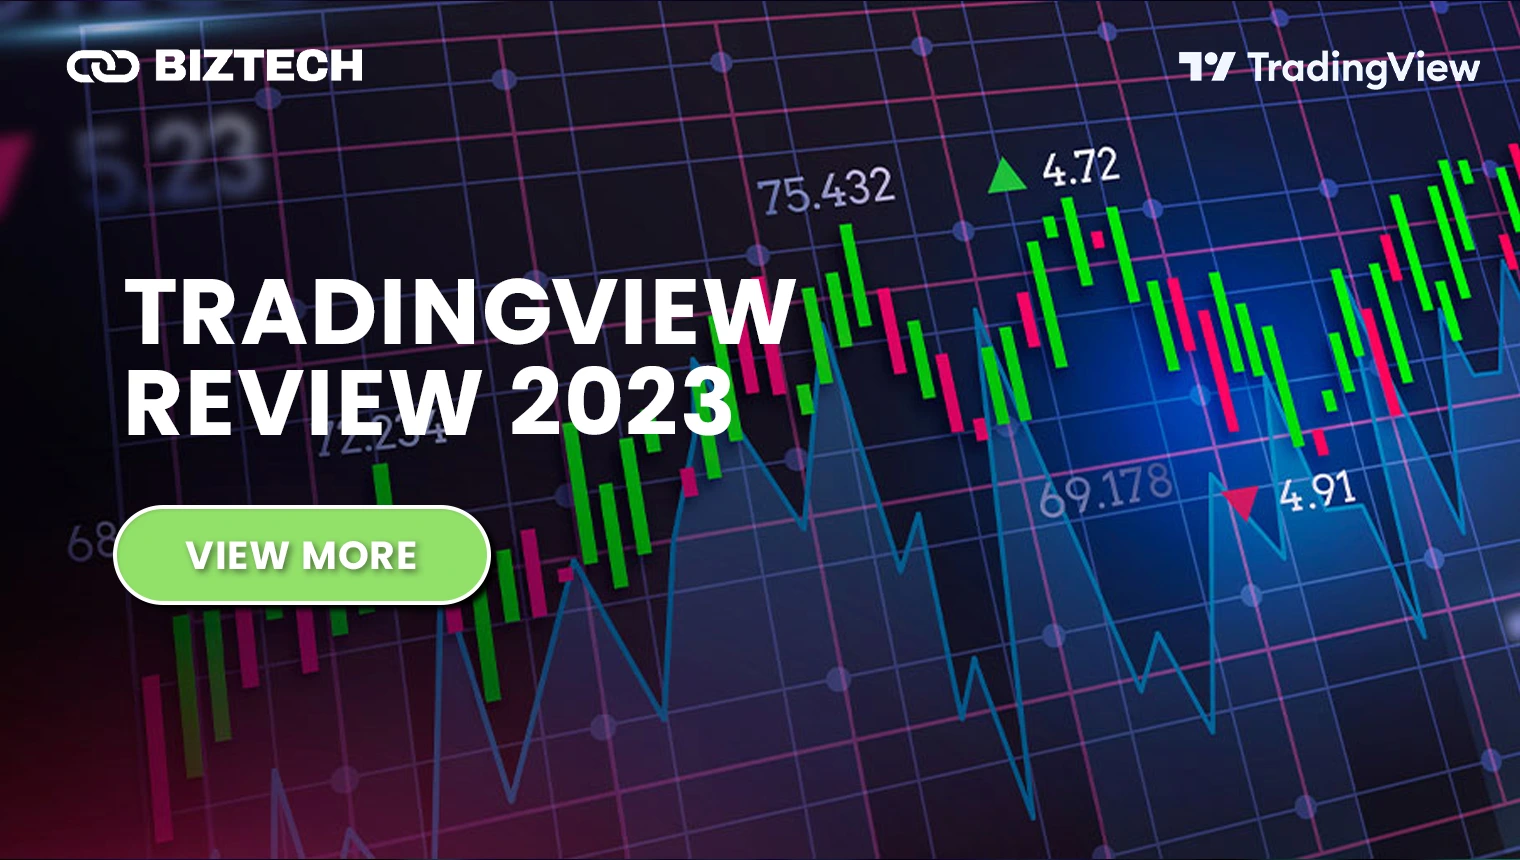 TradingView Review 2023: The Trader’s Perspective